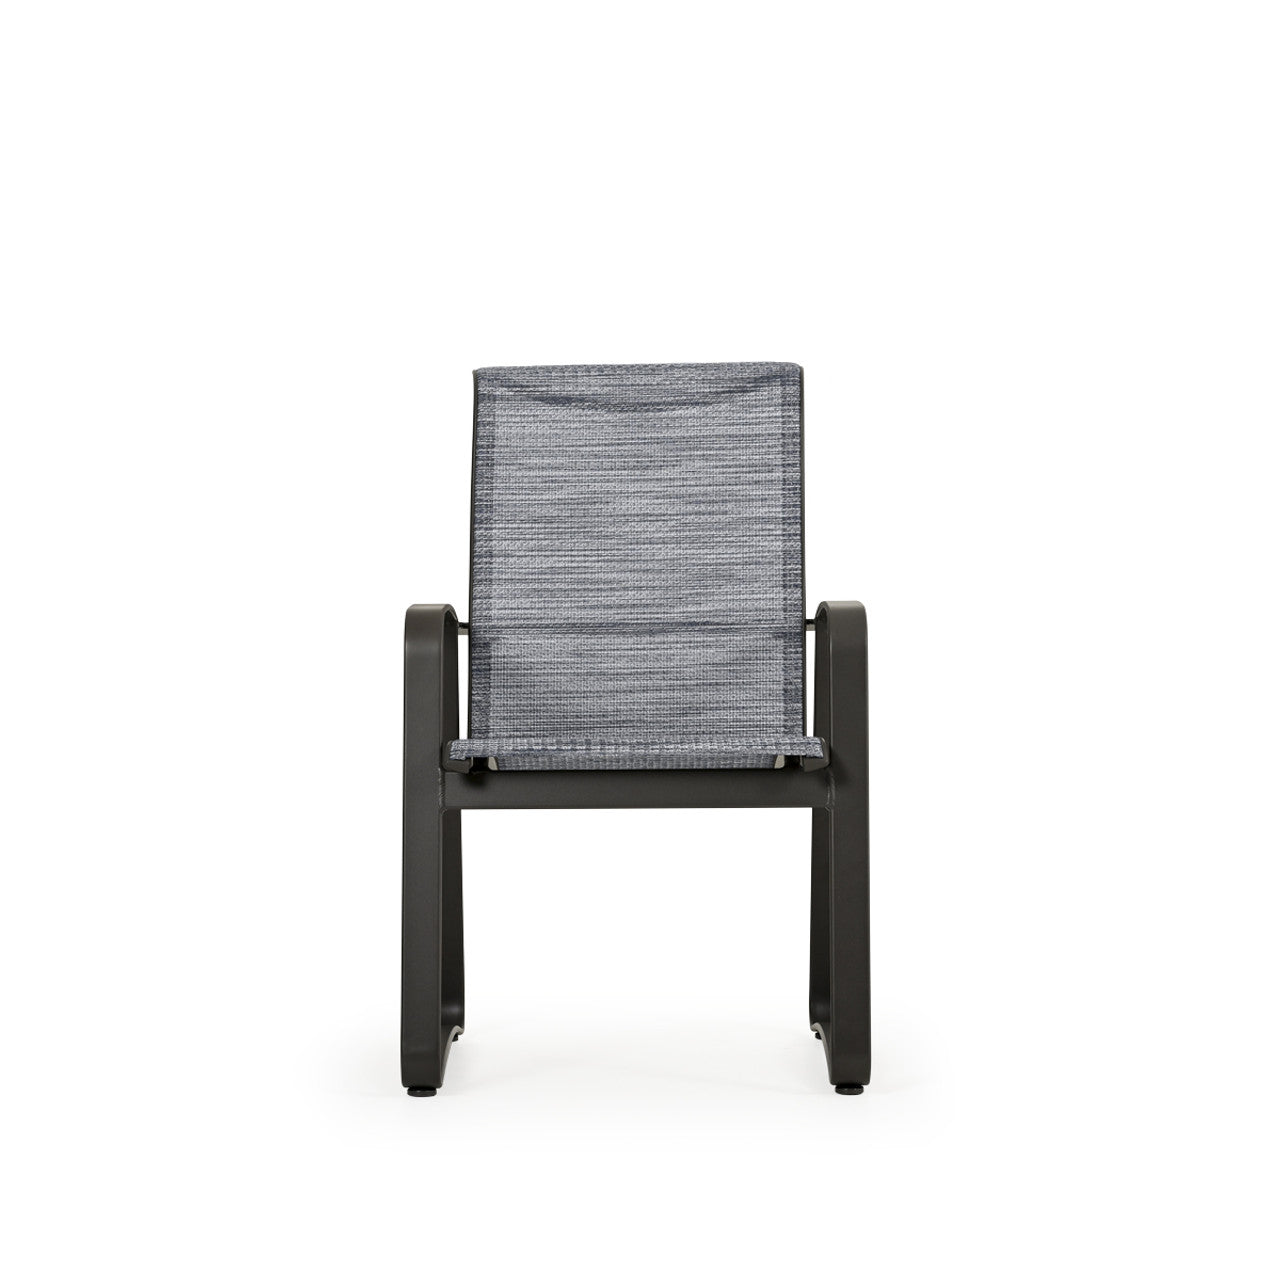 Leaders Furniture Serenity Grove Outdoor Sling Dining Chair